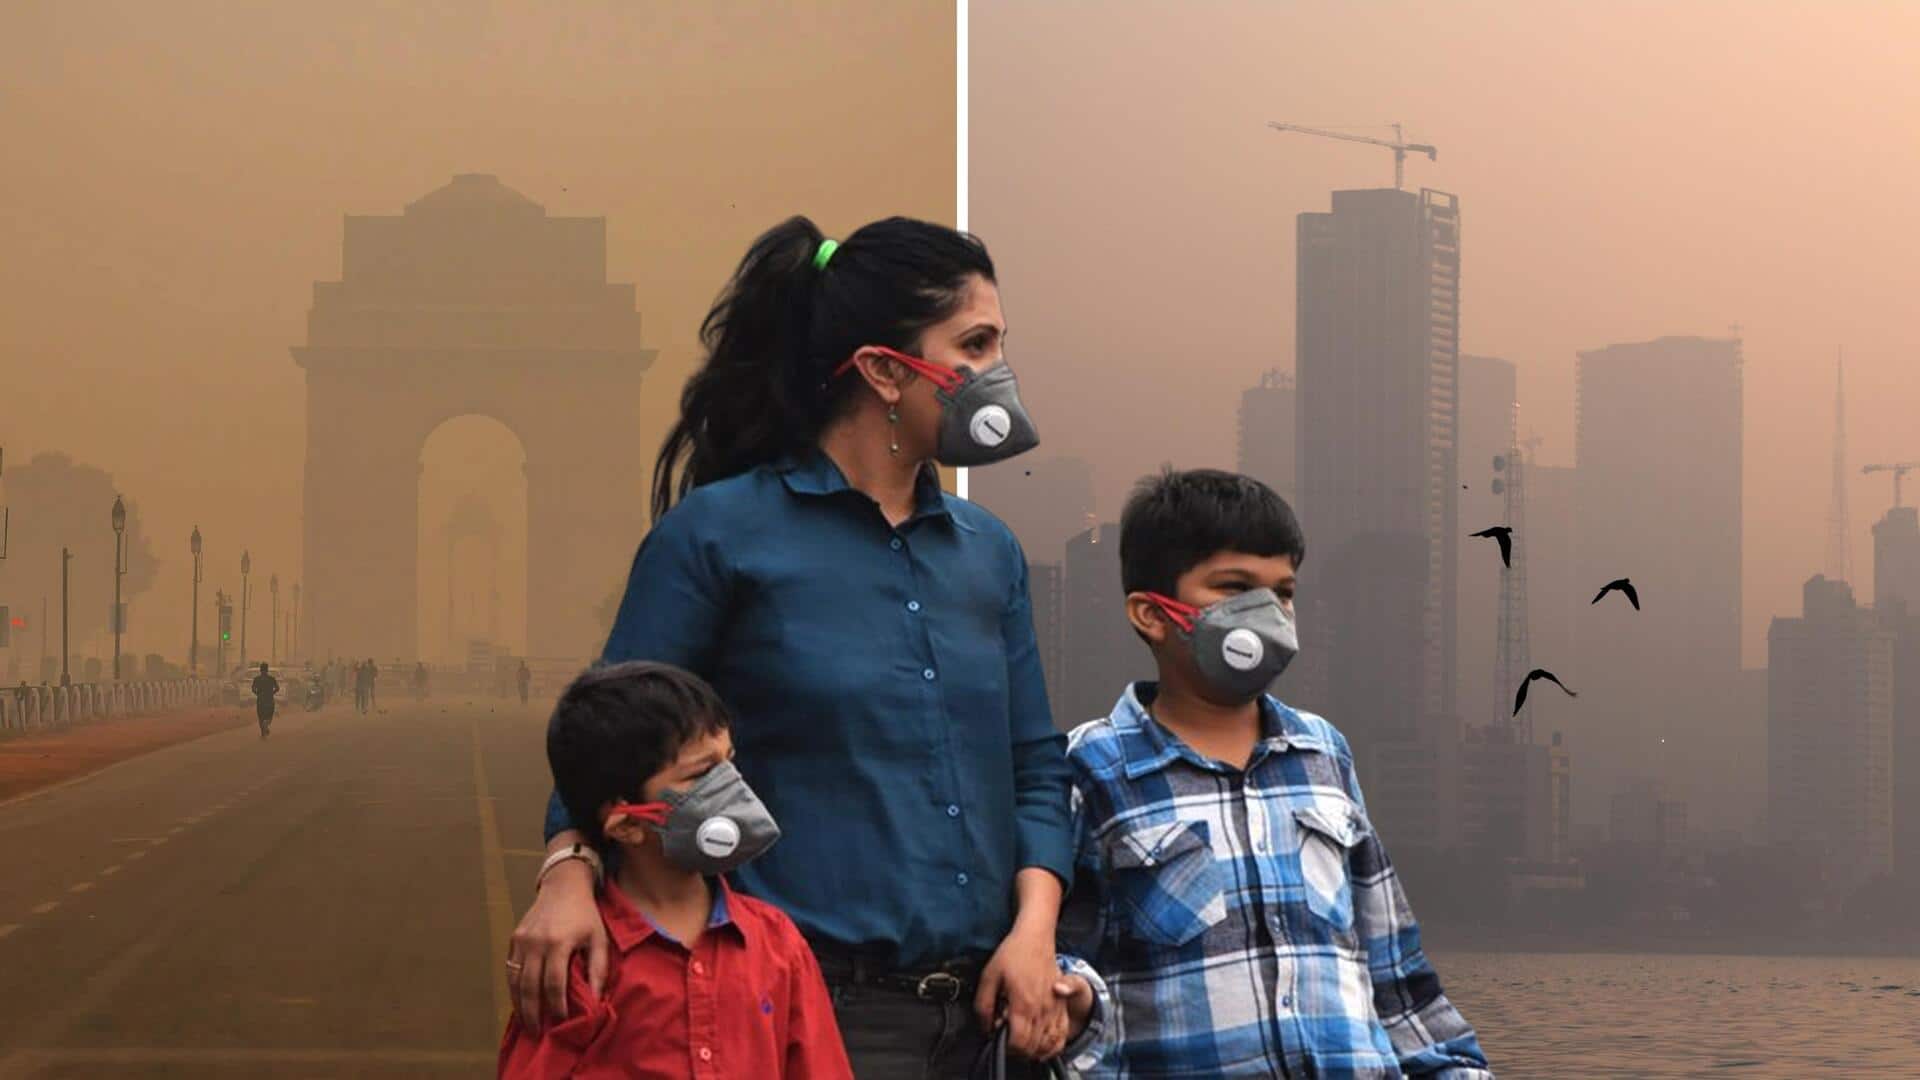 Delhi, Mumbai face worst pollution in years for October: Reports